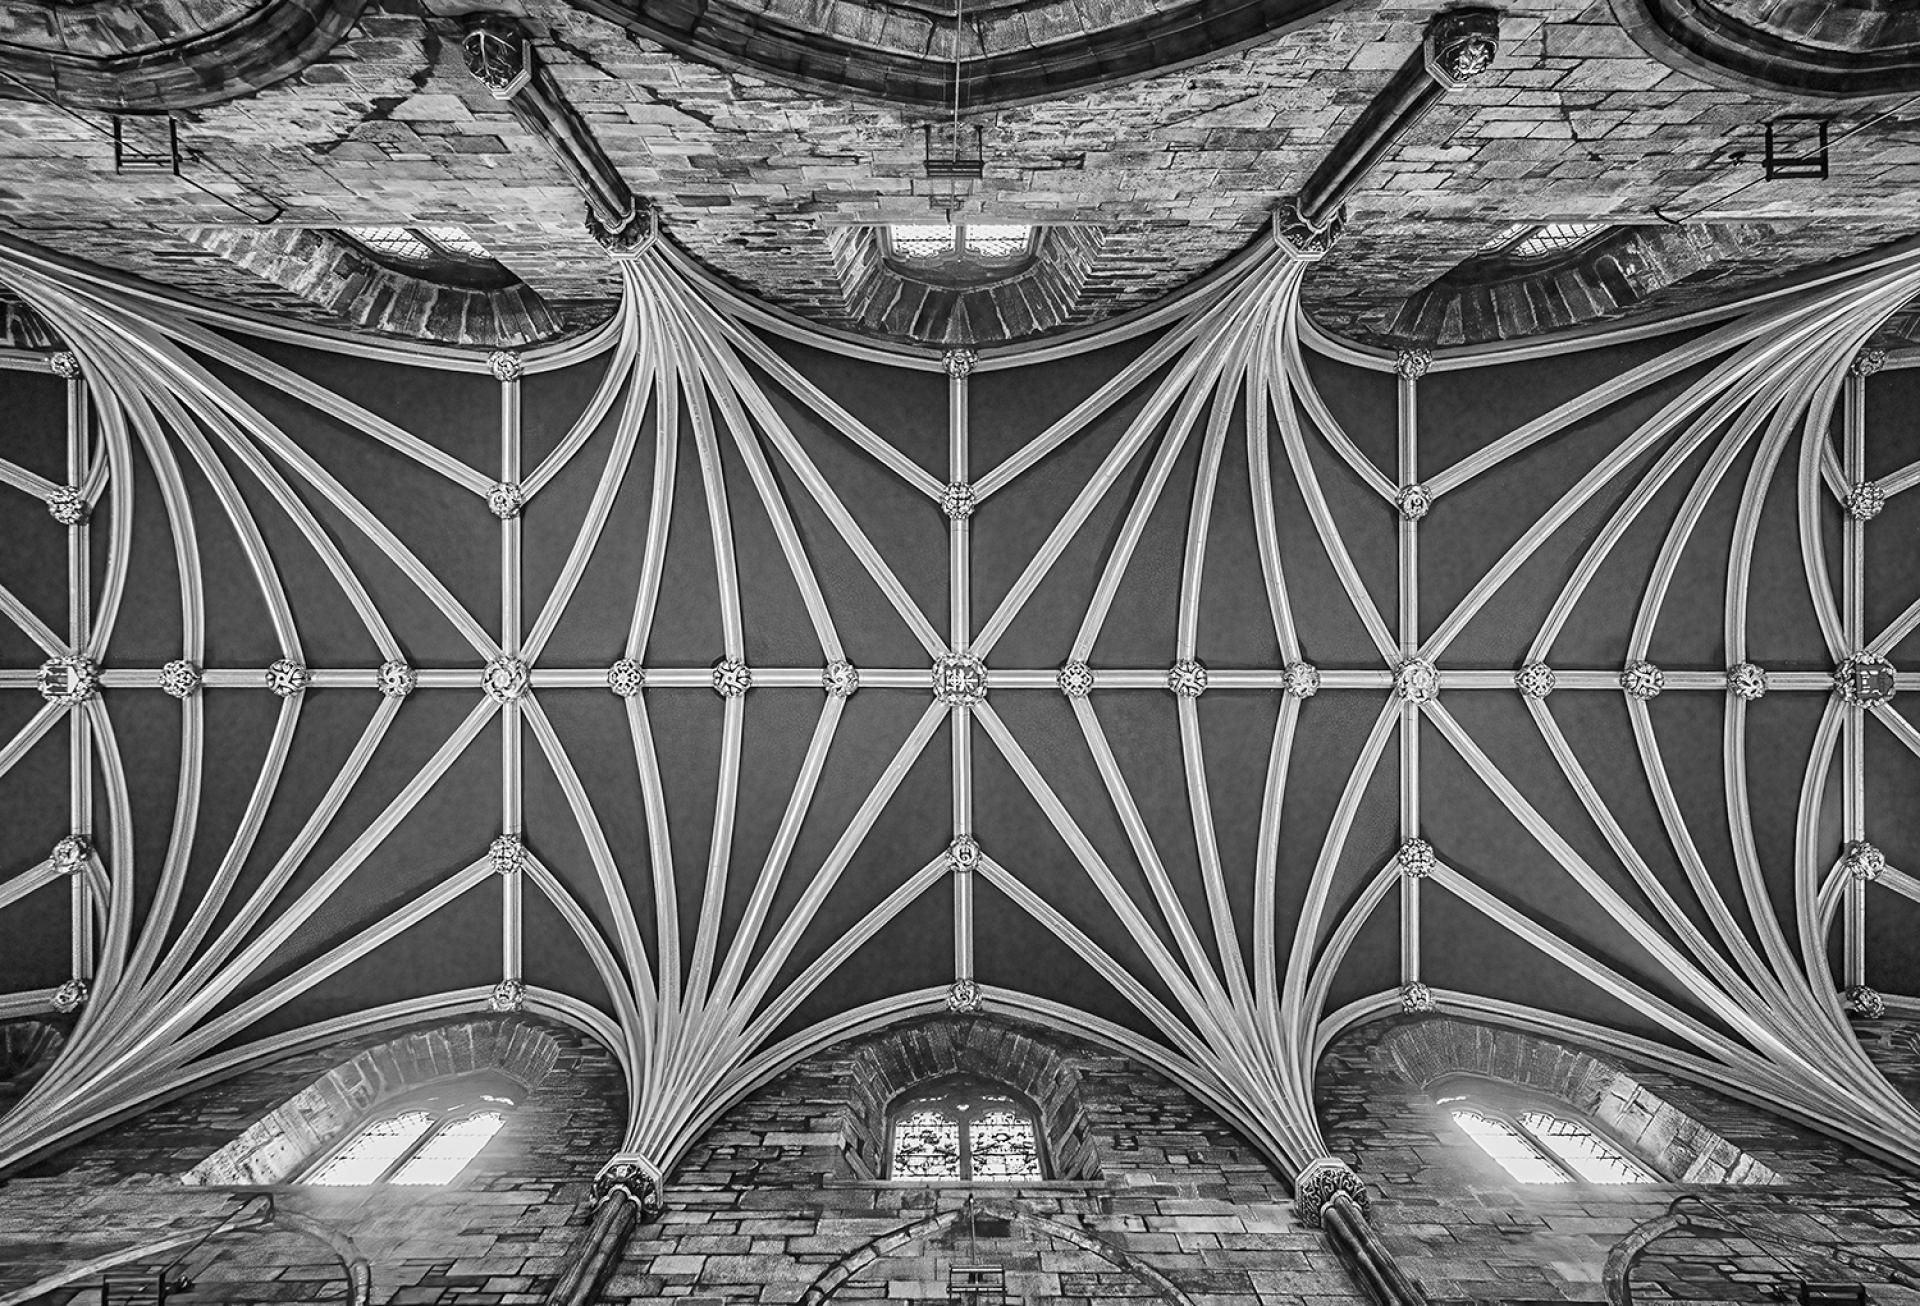 London Photography Awards Winner - Vaulting, St. Giles' Cathedral